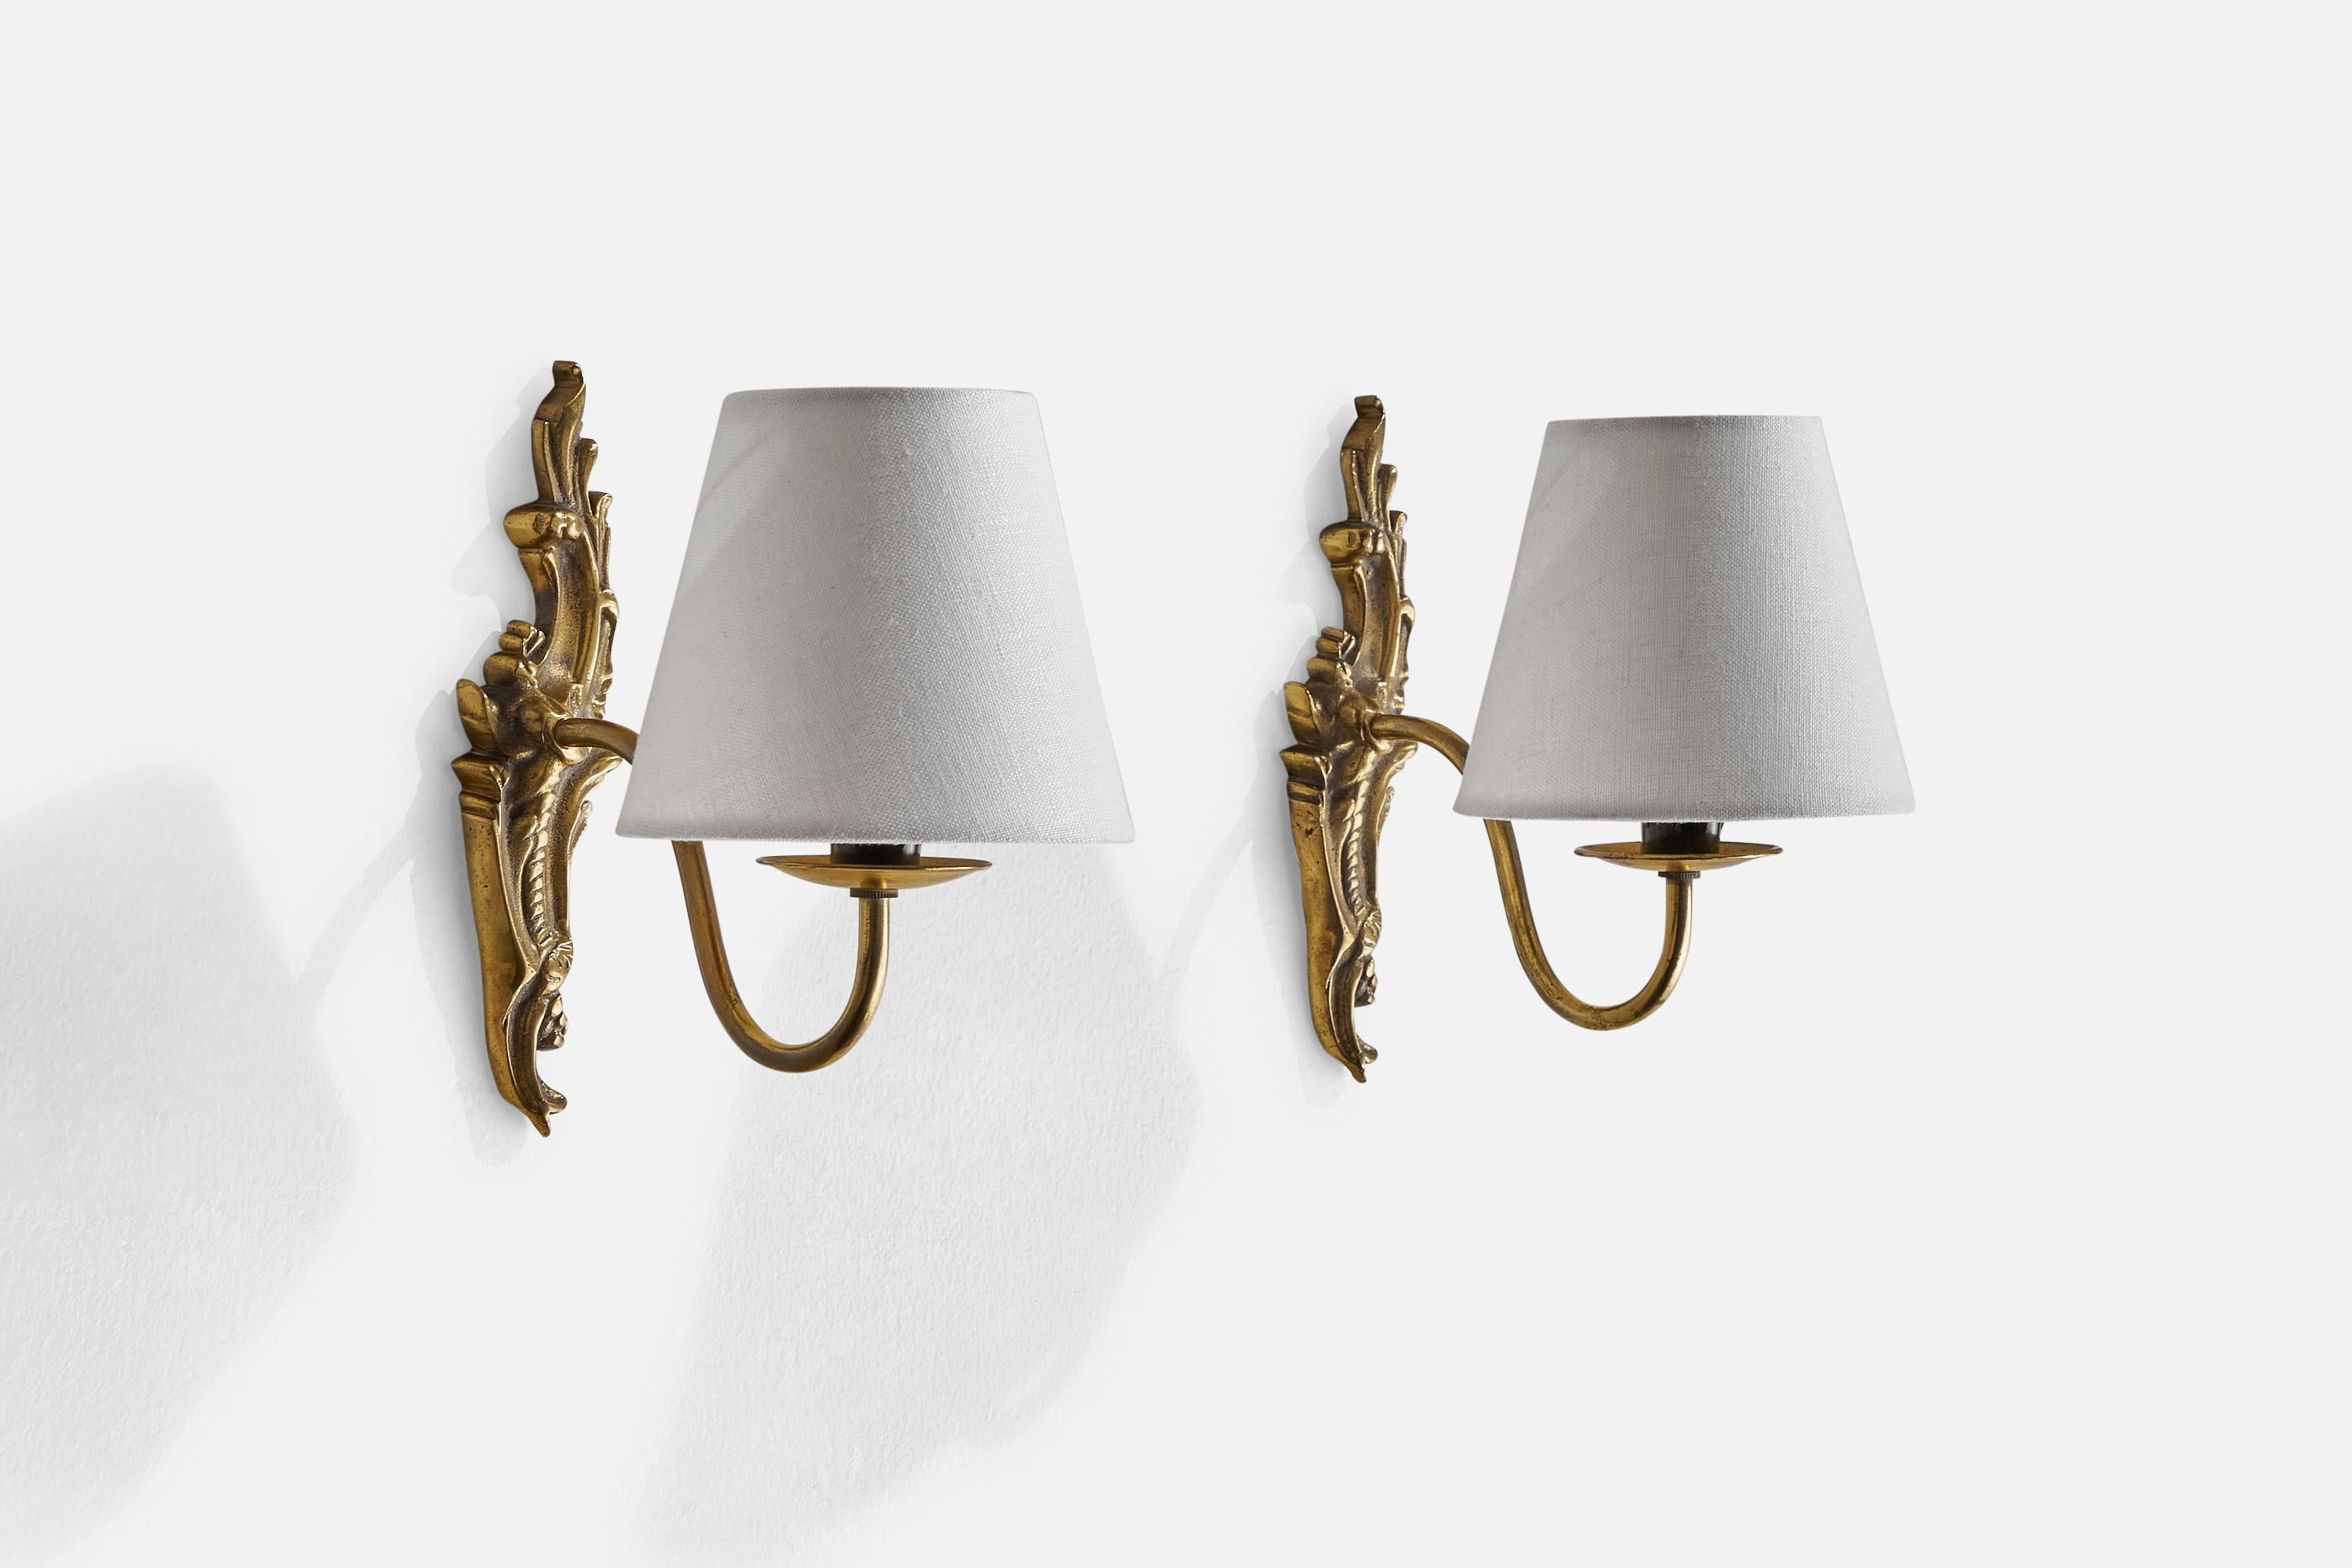 A pair of brass and white fabric wall lights designed and produced in Sweden, c. 1930s.

Overall Dimensions (inches): 8” H x 5” W x 8” D
Back Plate Dimensions (inches): n/a
Bulb Specifications: E-12 Bulb
Number of Sockets: 2
All lighting will be